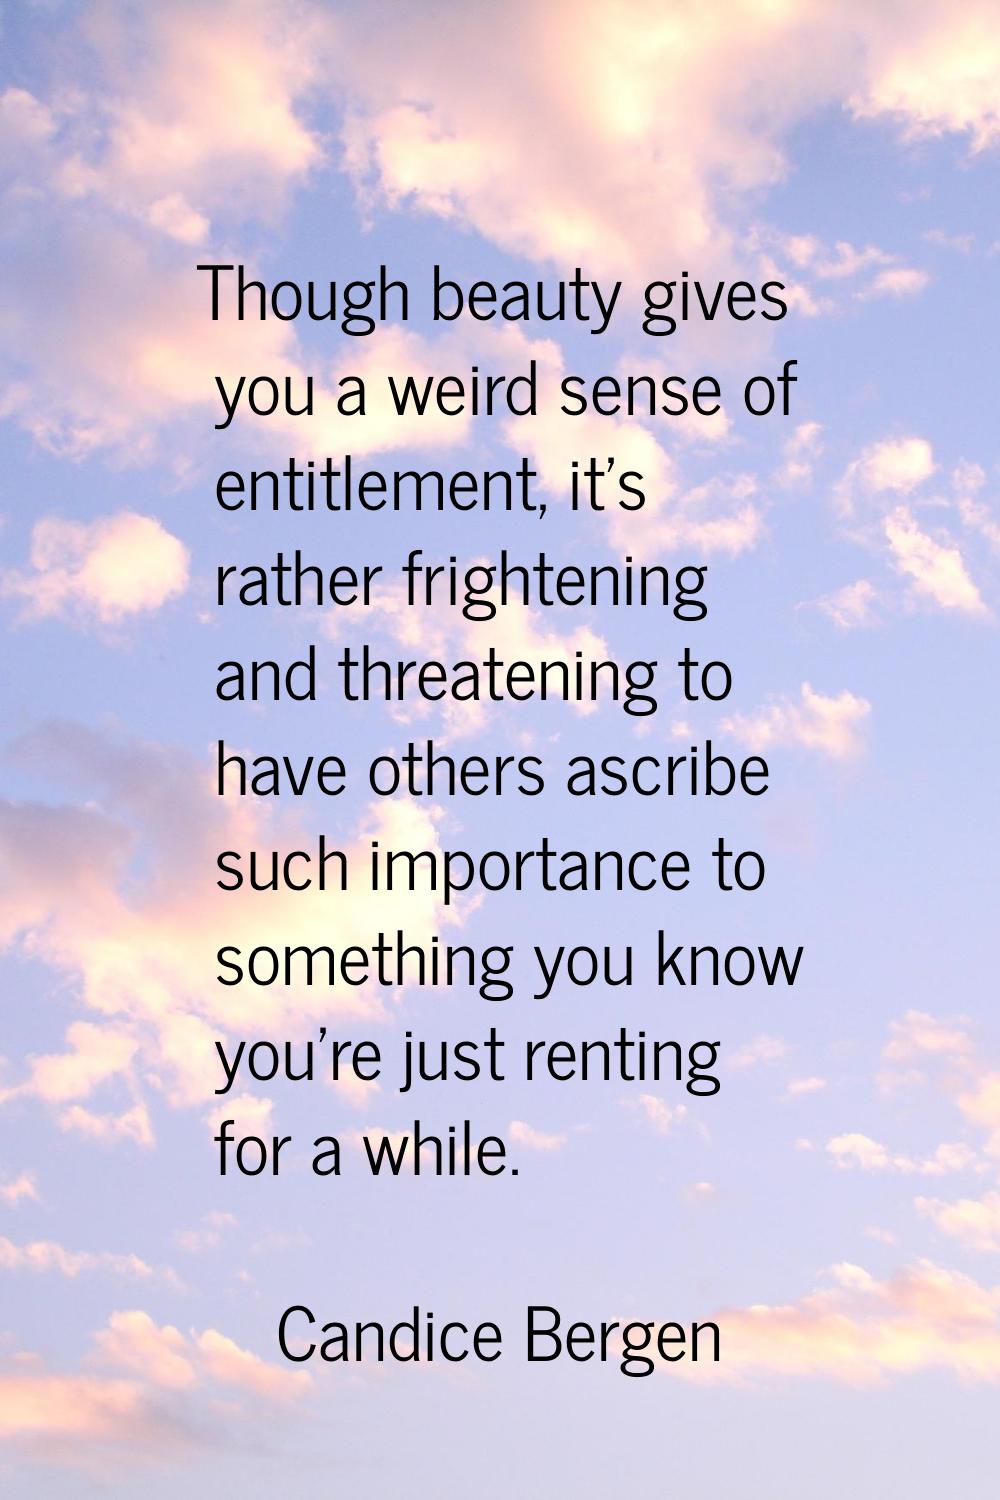 Though beauty gives you a weird sense of entitlement, it's rather frightening and threatening to ha